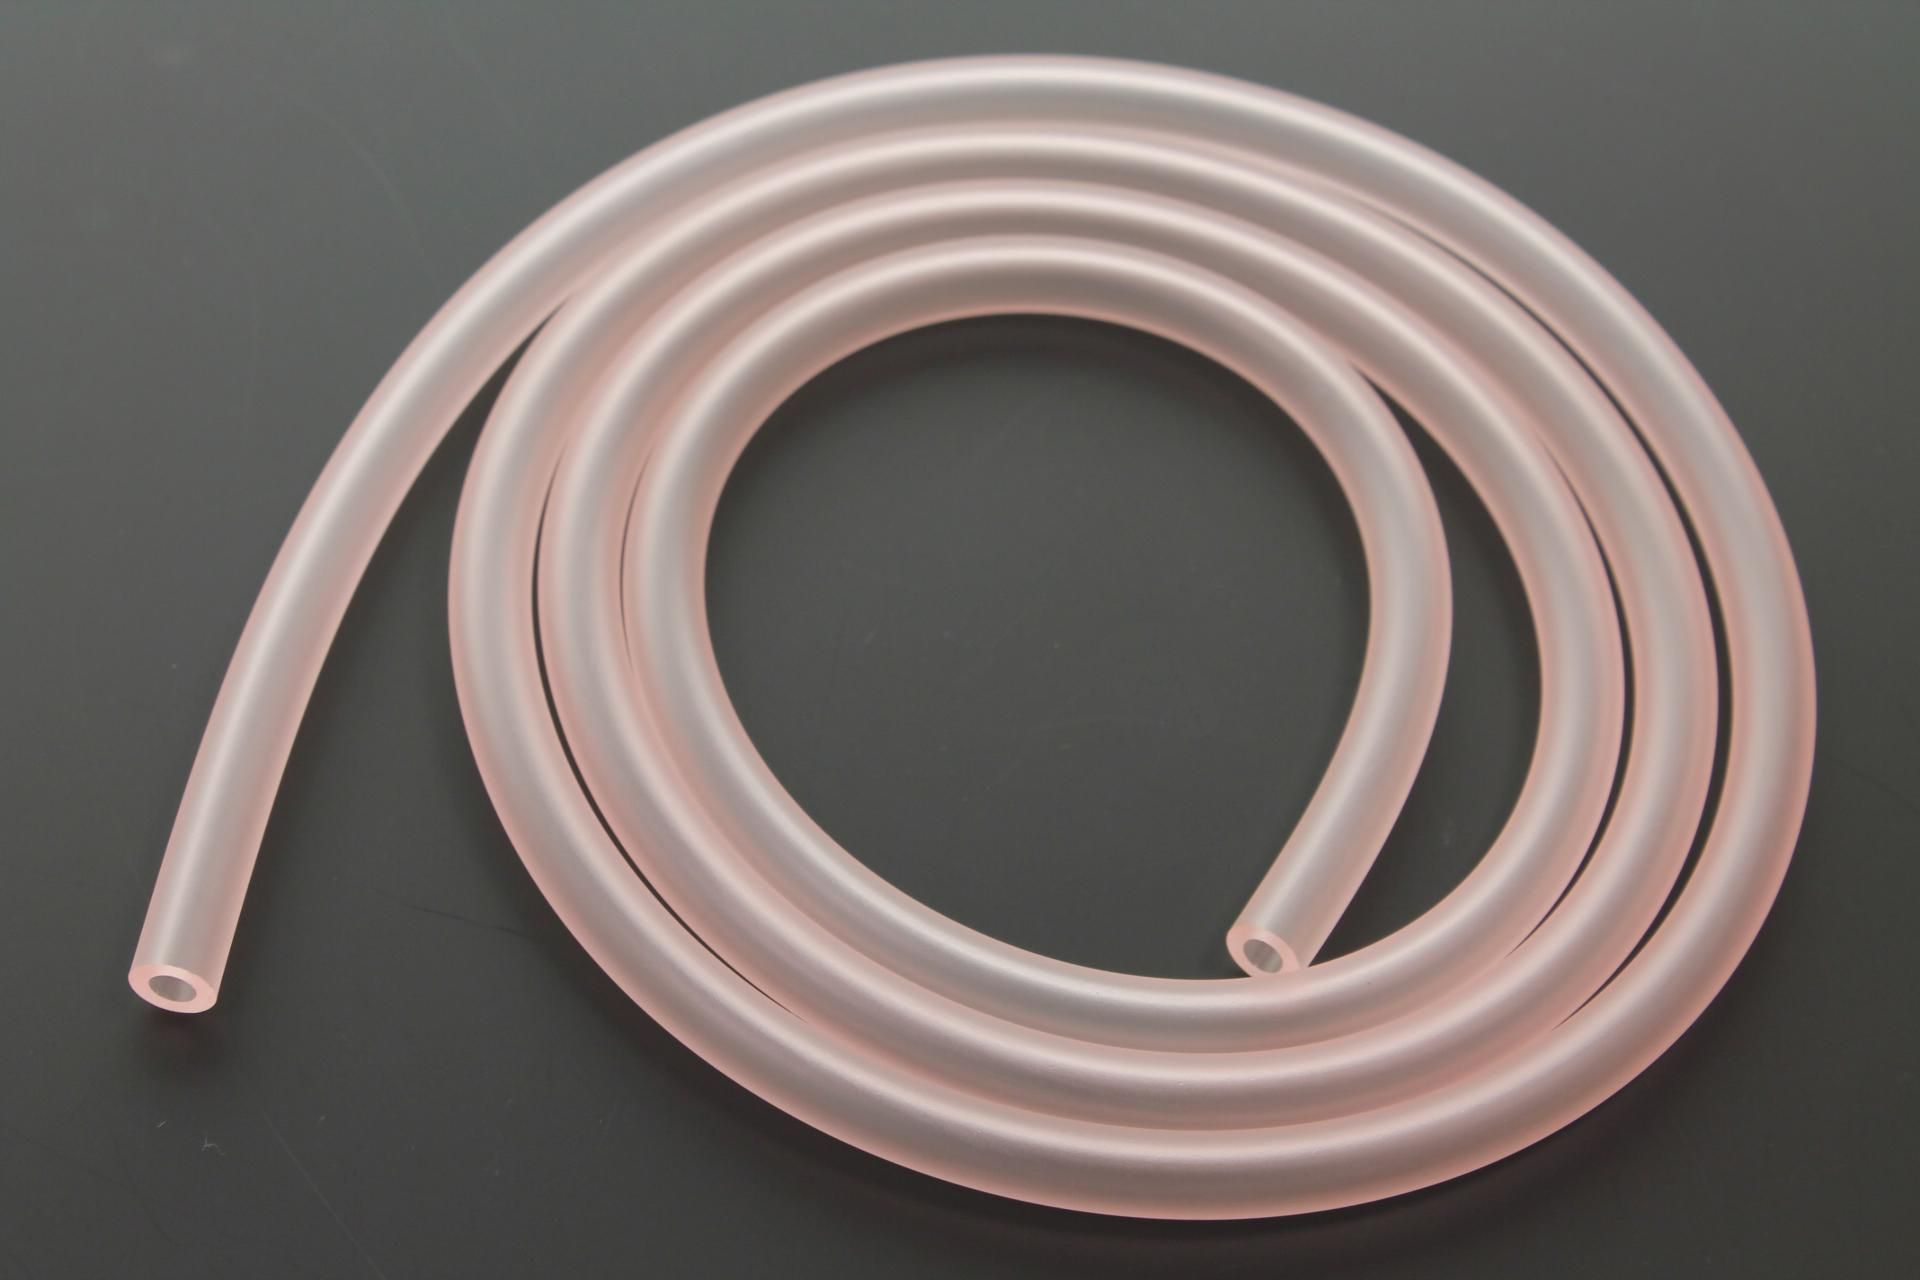 91A20-05125-00 Superseded by 91A20-05145-00 - TUBE, FLEXIBLE